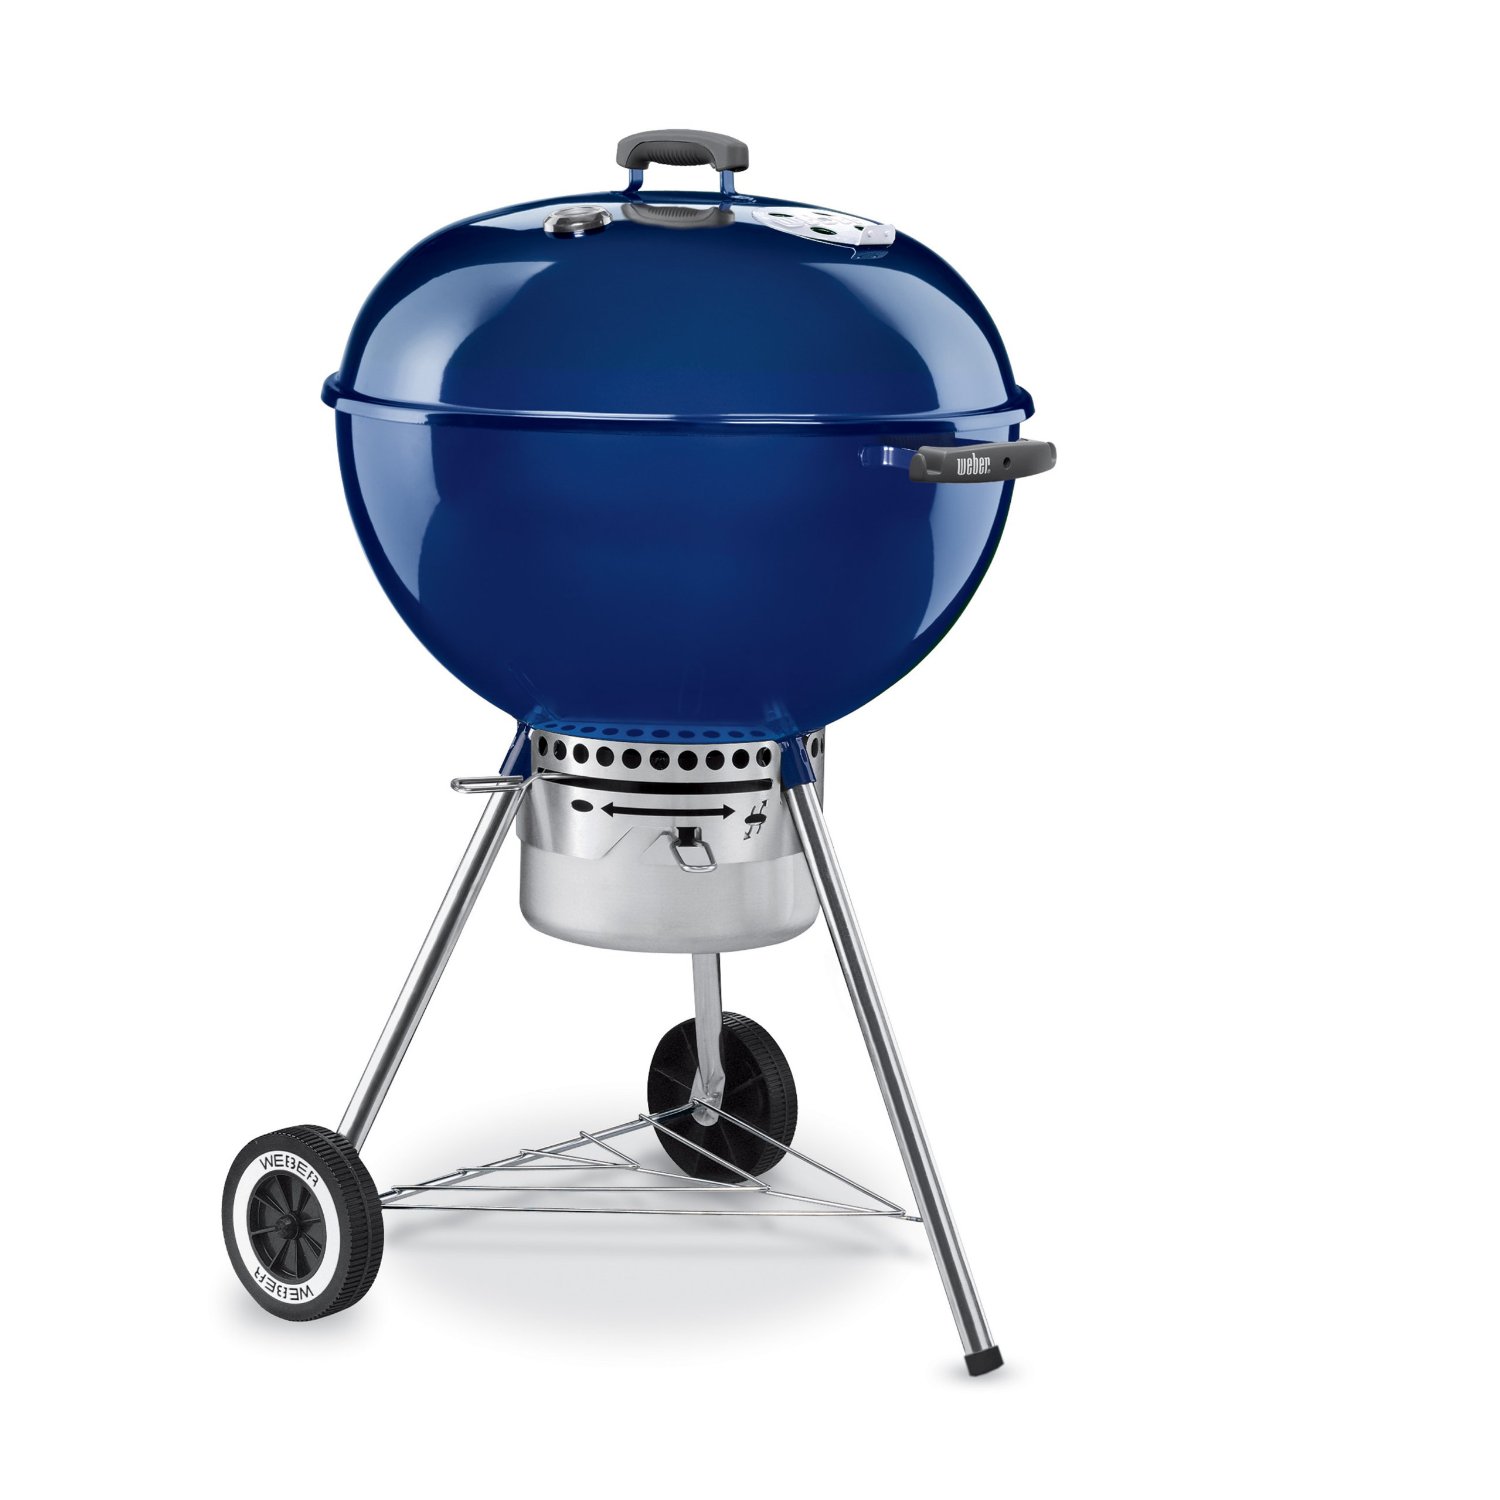 Weber 1358001 One-Touch Gold Kettle Grill, 22-Inch, Dark Blue 